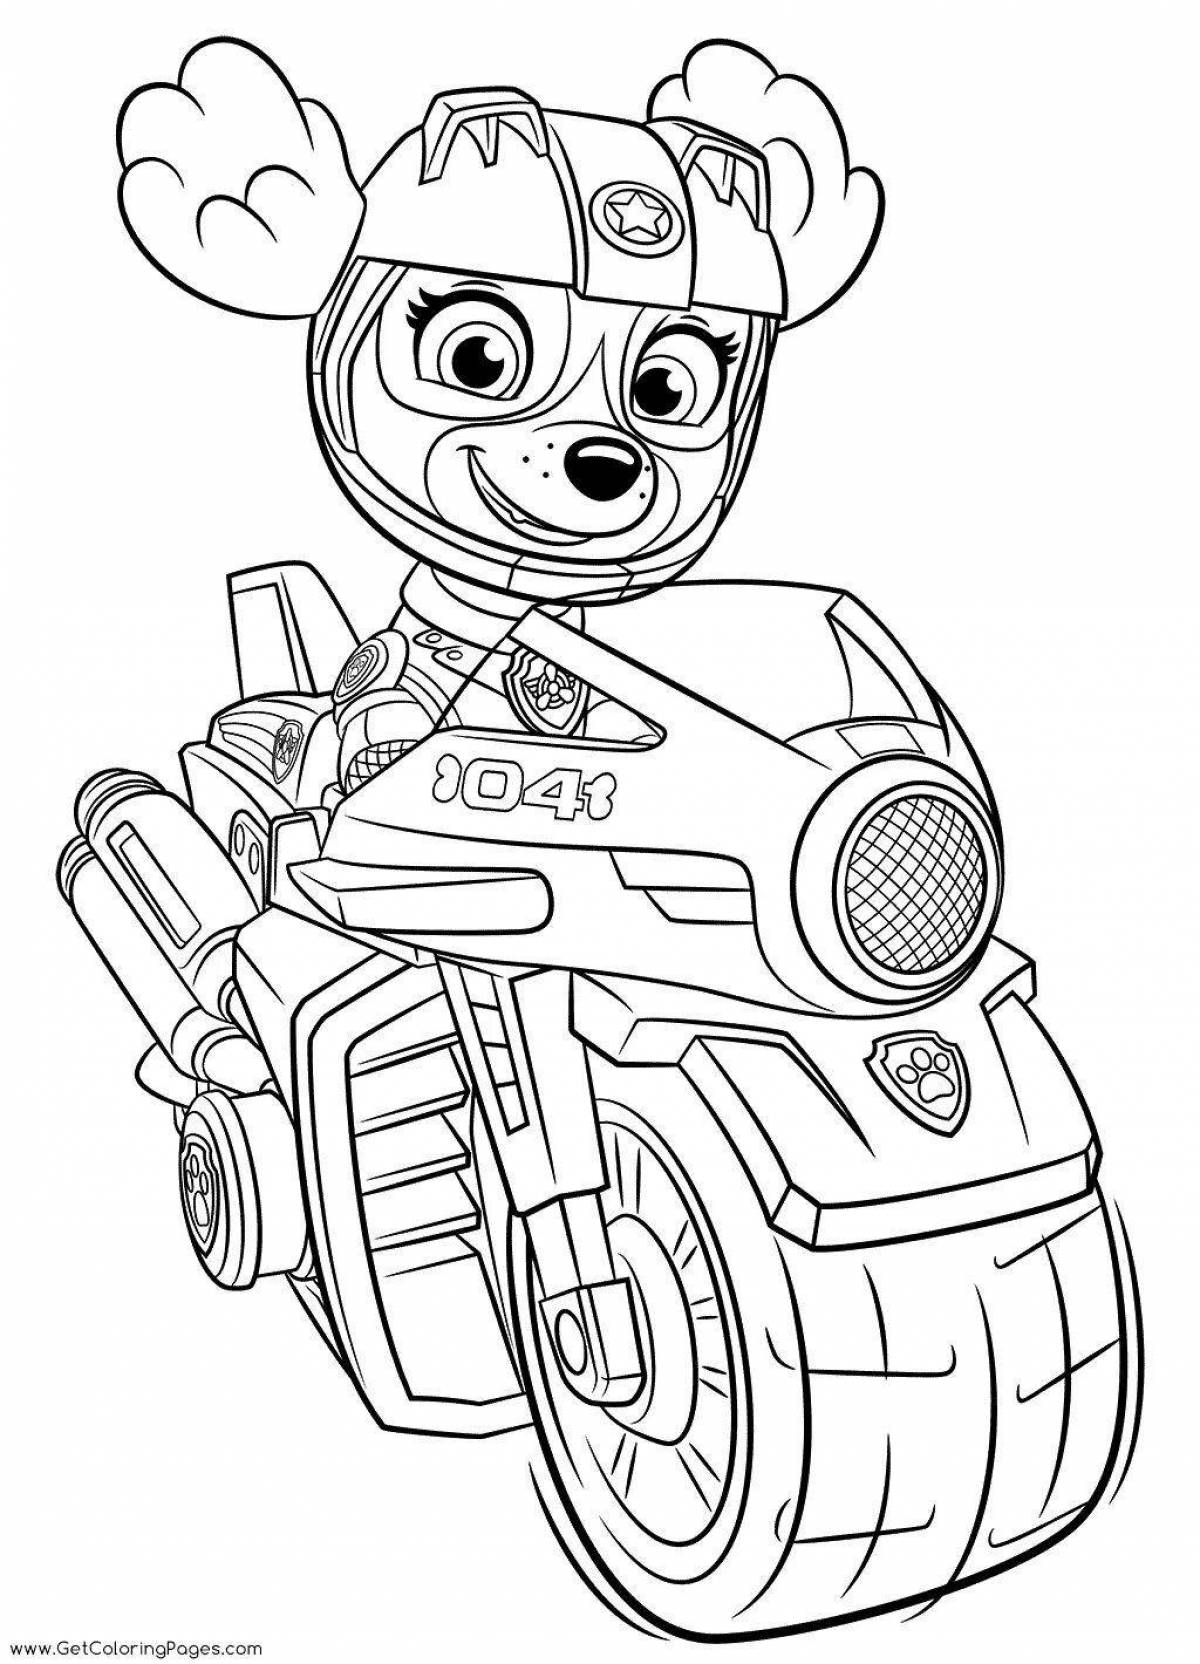 Radiant liberty paw patrol coloring page